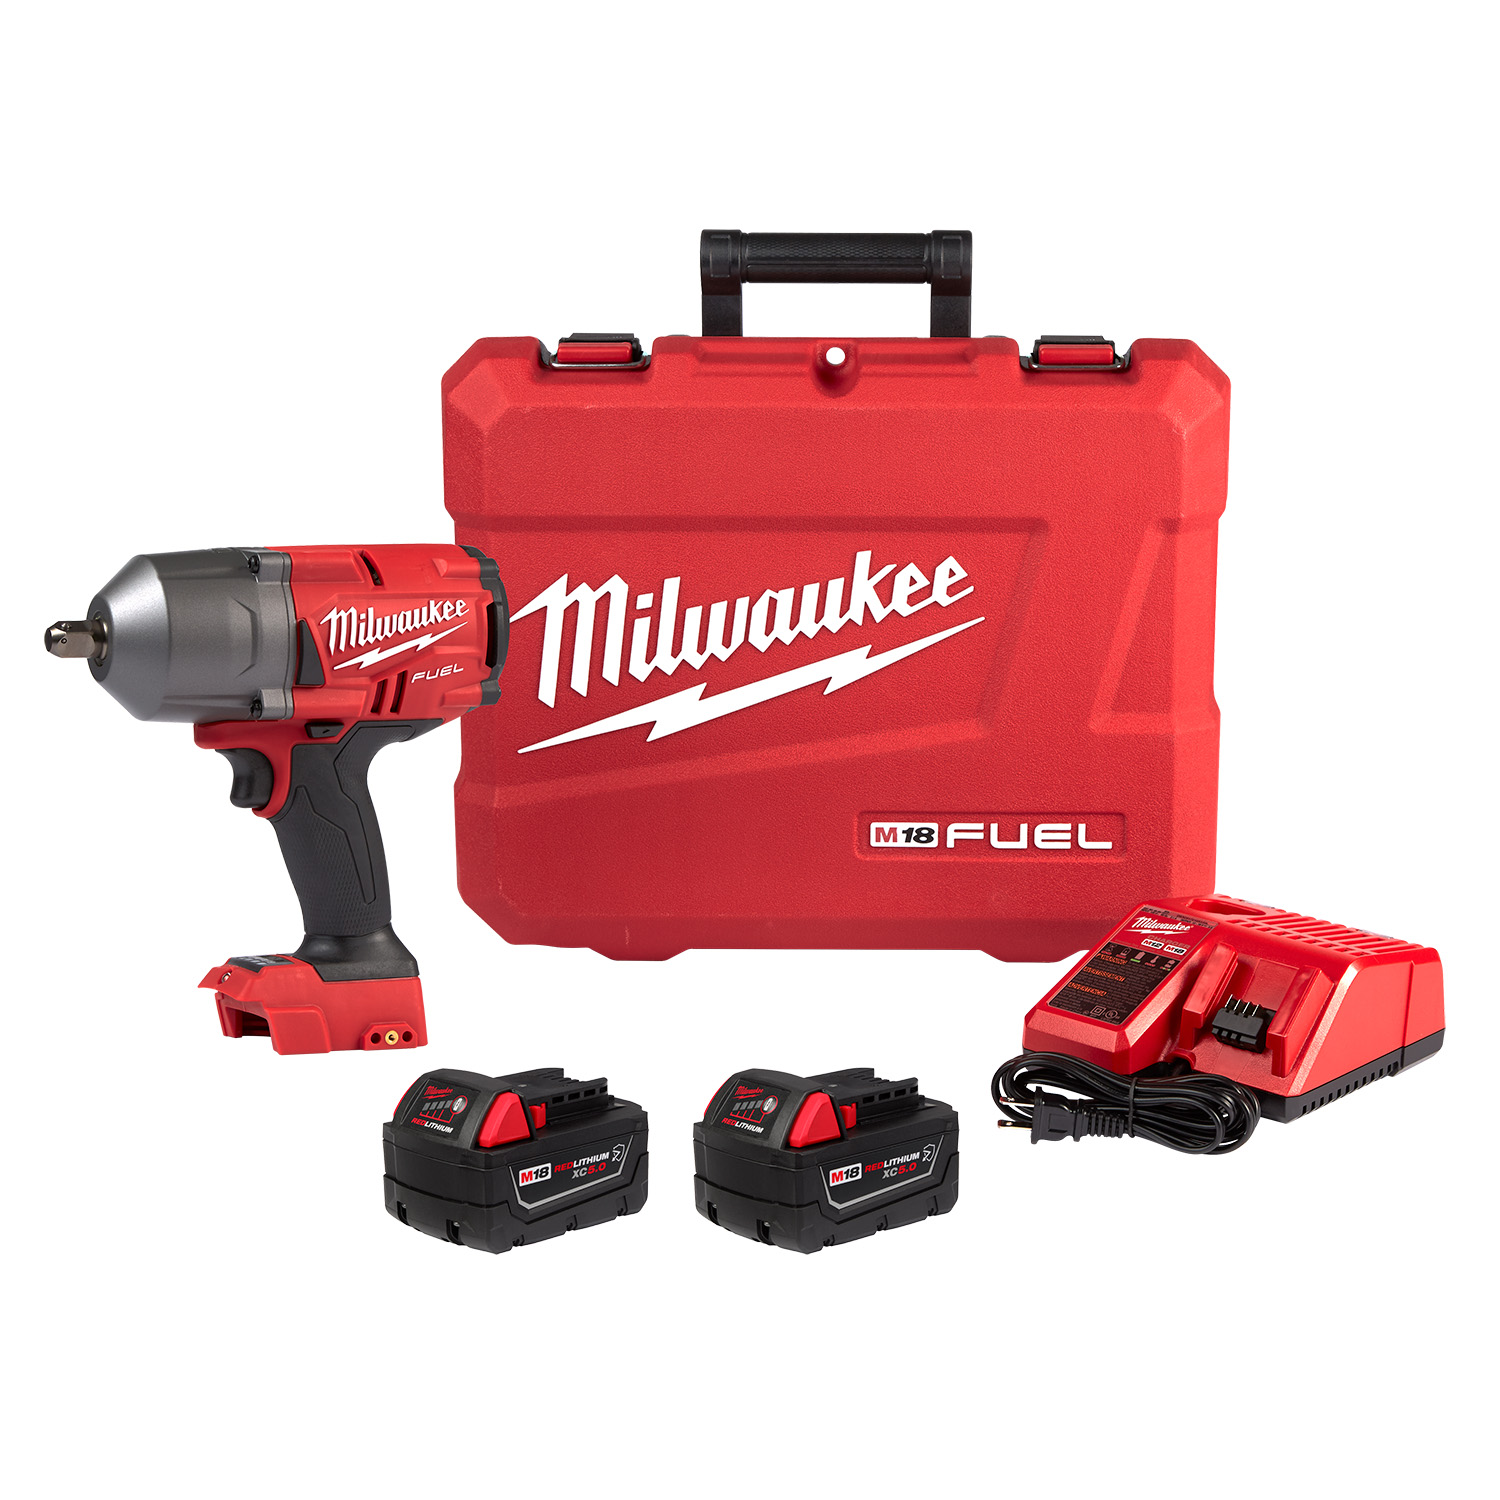 Milwaukee M18 Fuel High Torque 1/2 Inch Impact Wrench with Pin Detent Kit from Columbia Safety